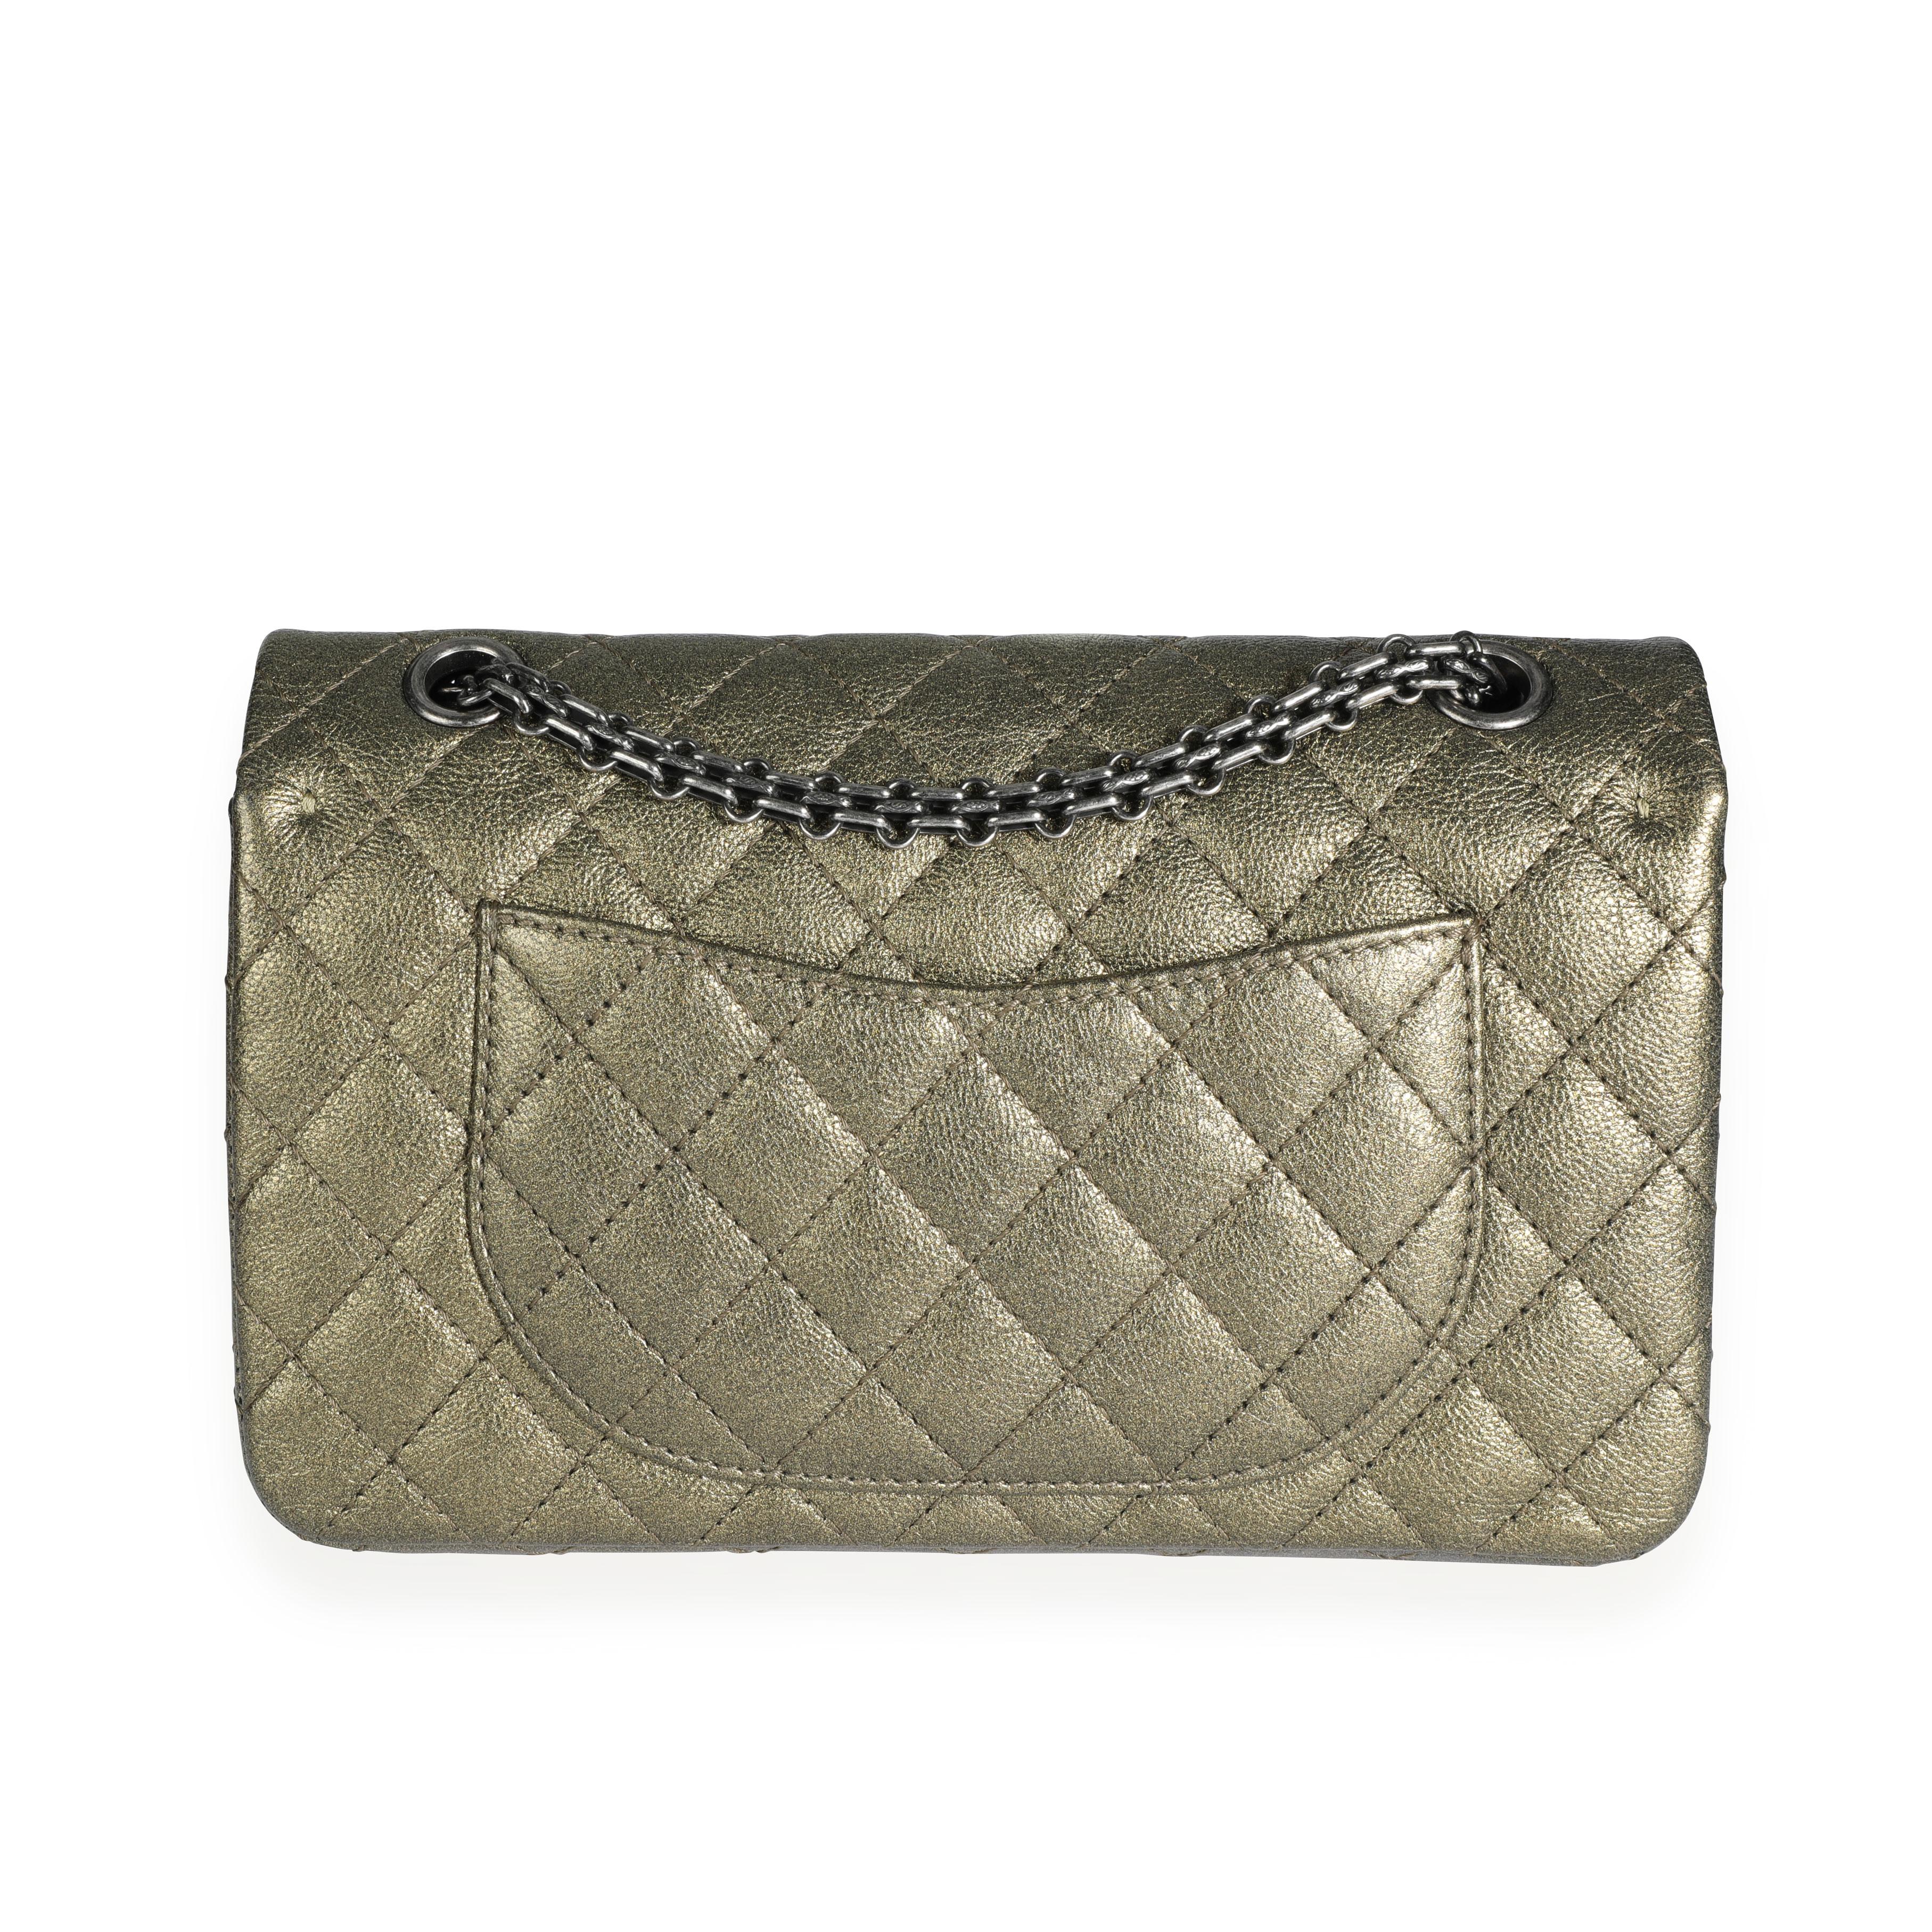 Chanel Gold Quilted Calfskin Reissue 2.55 225 Double Flap Bag 1